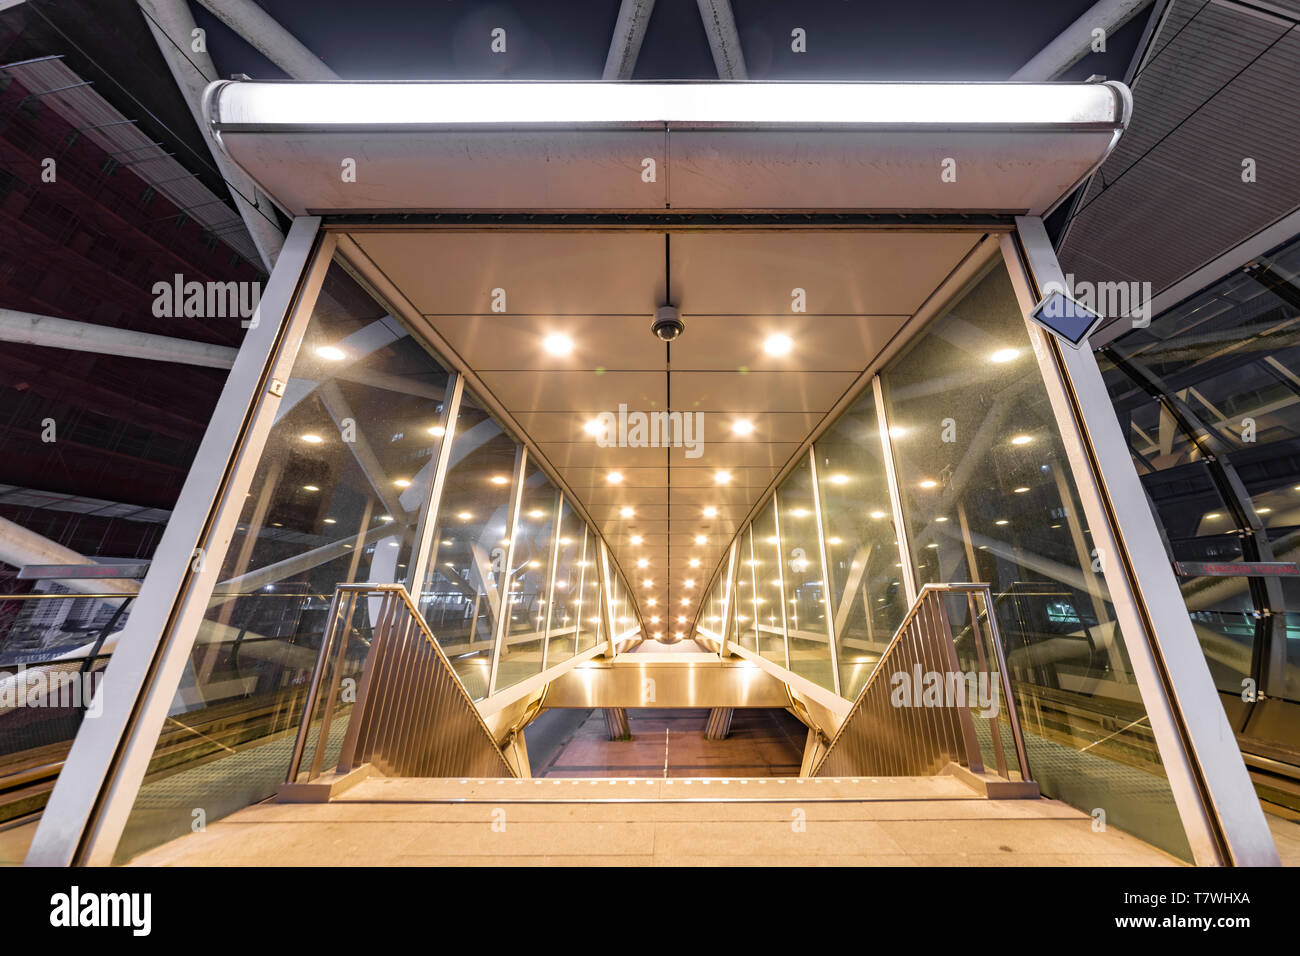 Beatrixkwartier (Beatrix district in Dutch) entrance East escalator getting out from tramway station in The Hague at night, Netherlands Stock Photo